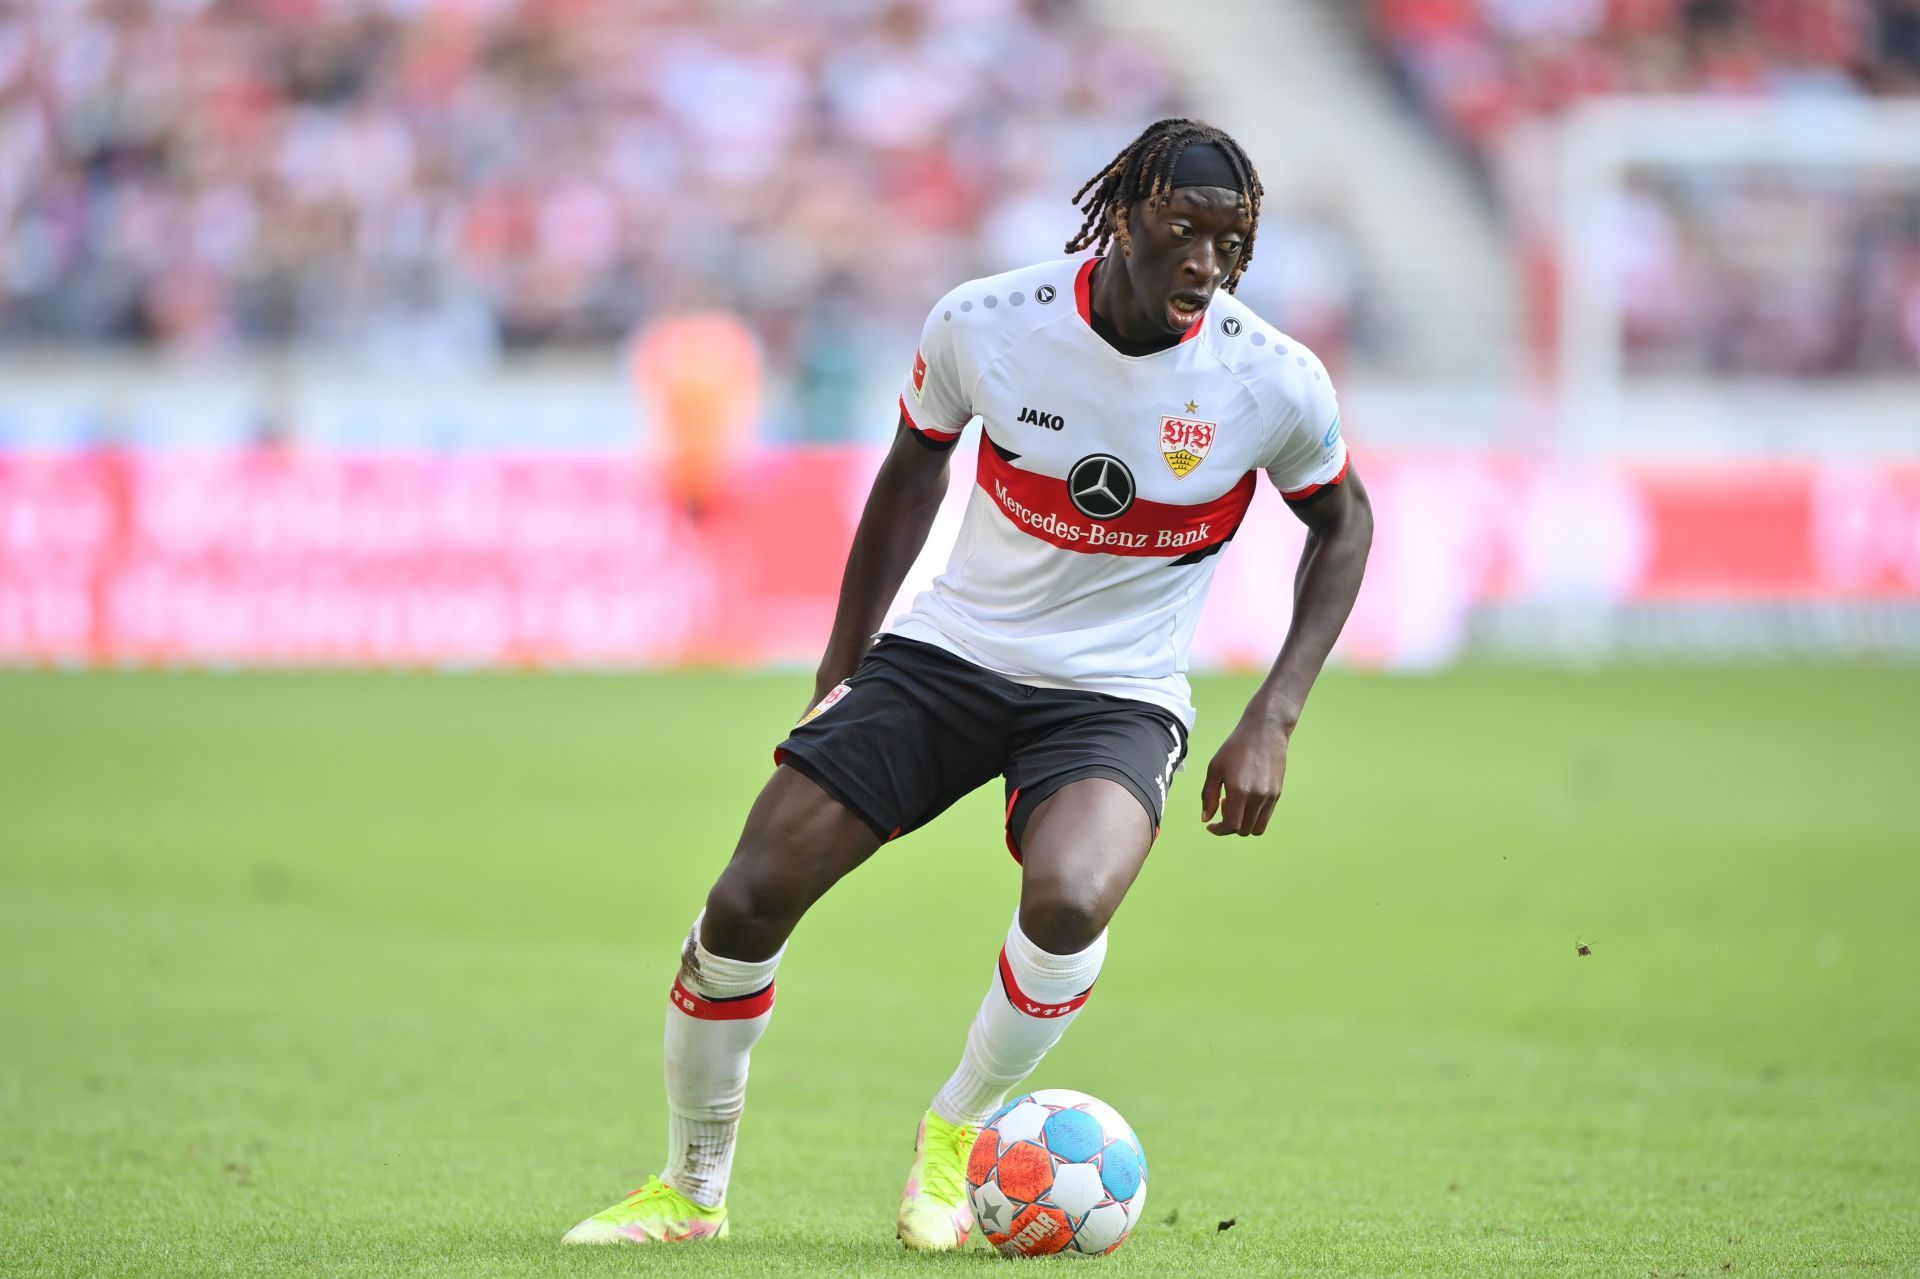 Coulibaly will be a huge miss for Stuttgart